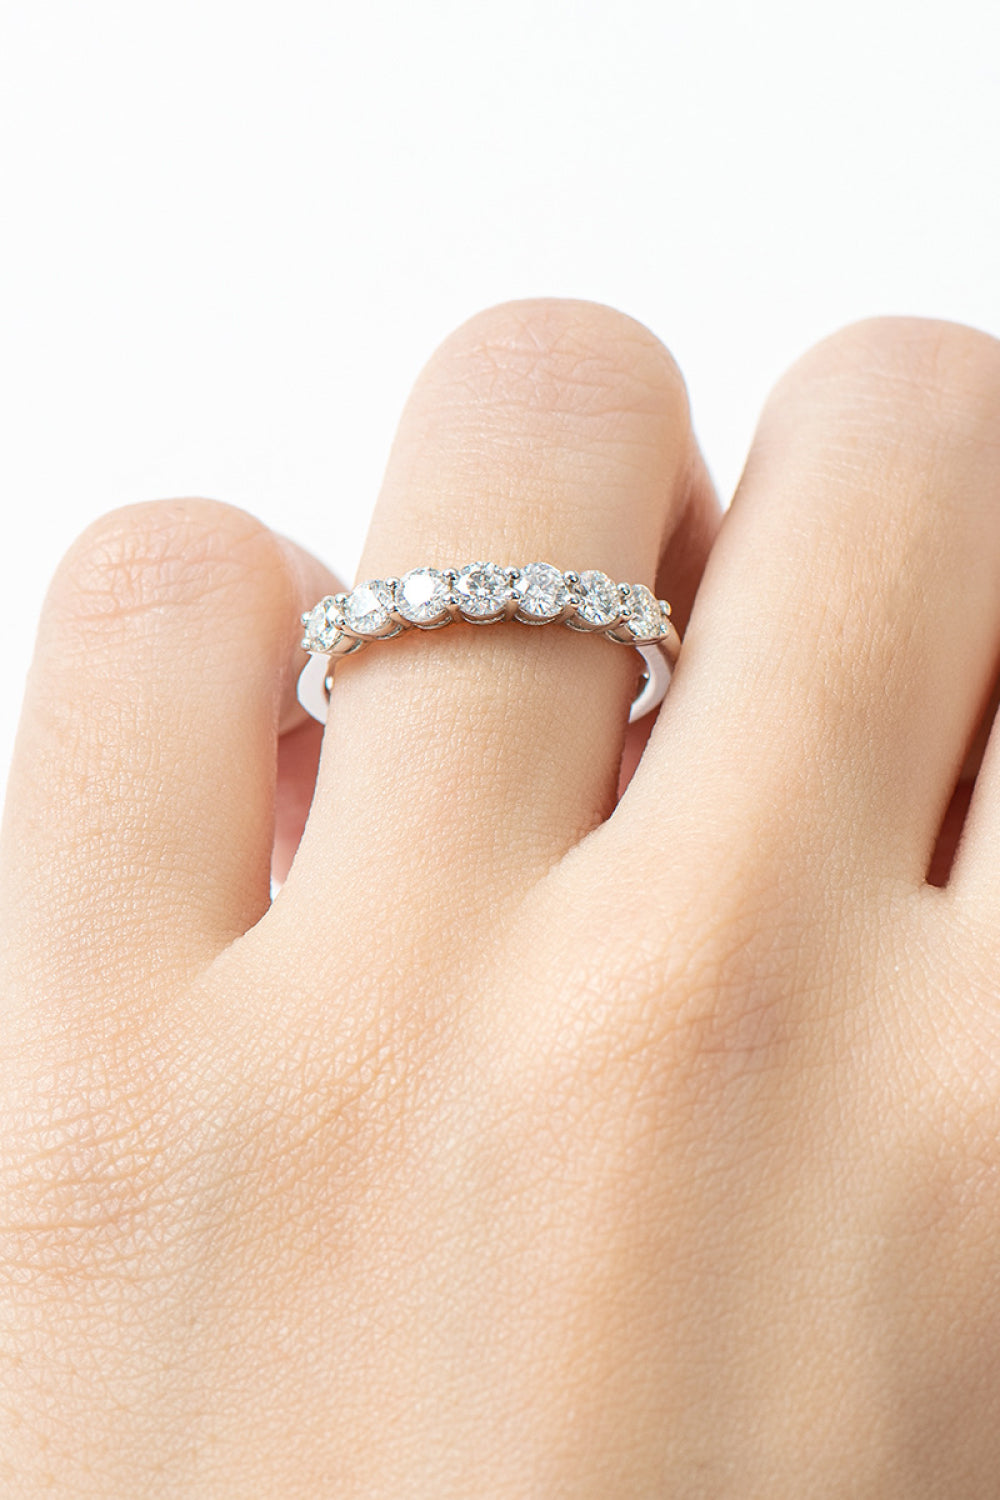 .7 Carat Can't Stop Your Shine Moissanite Platinum-Plated Ring